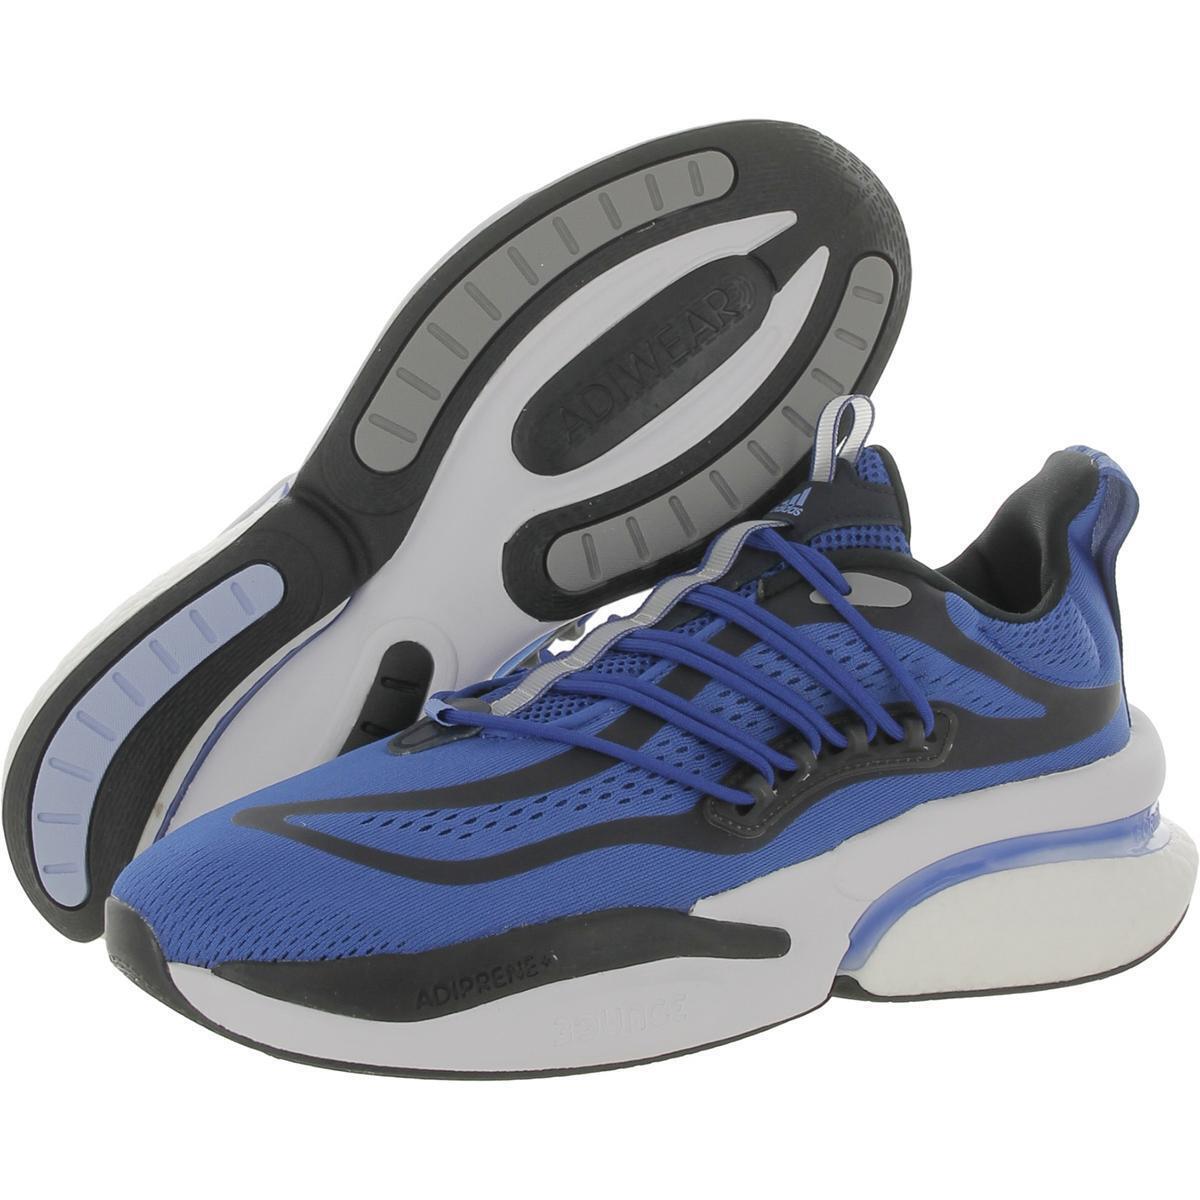 Adidas Mens Alphaboost V1 Fitness Running Training Shoes Sneakers Bhfo 4488 - Royal